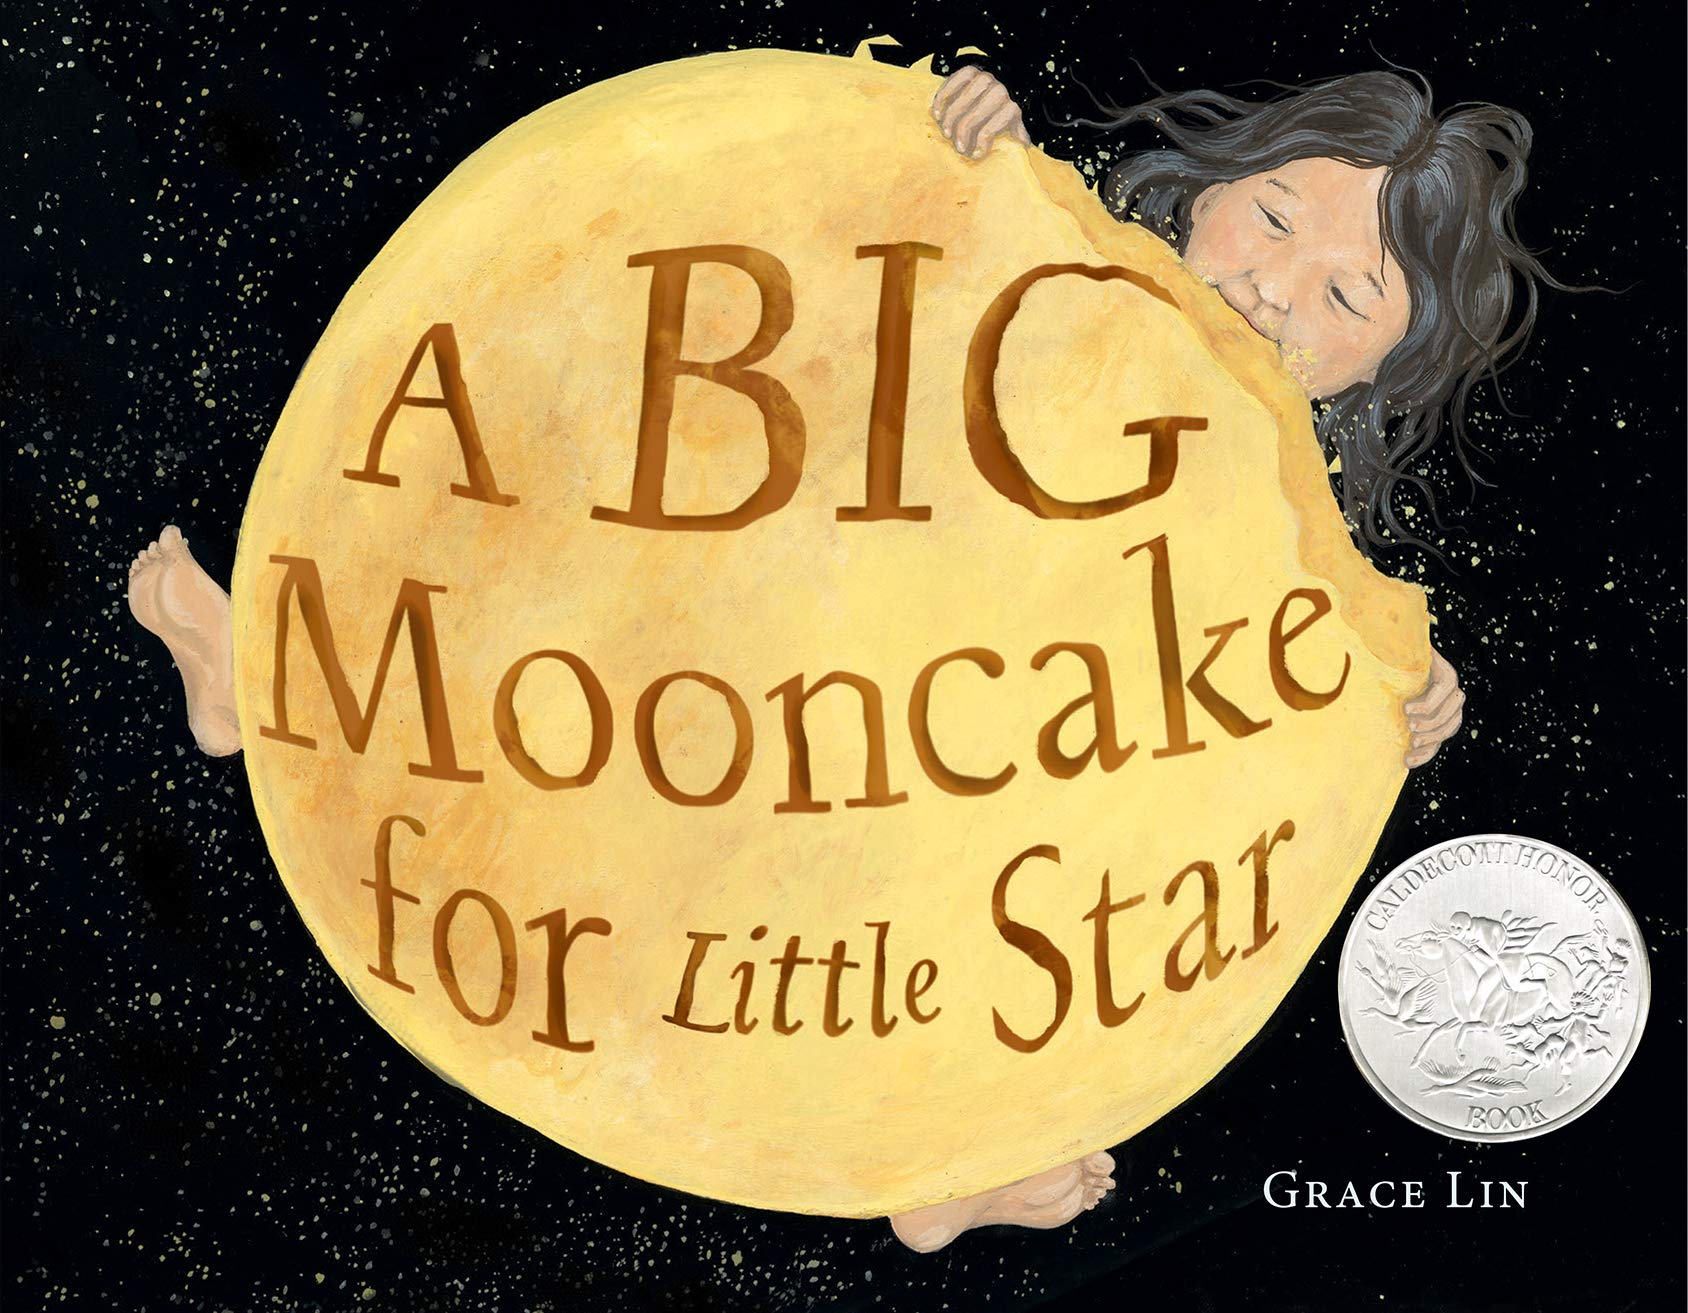 A Big Mooncake for Little Star, book cover